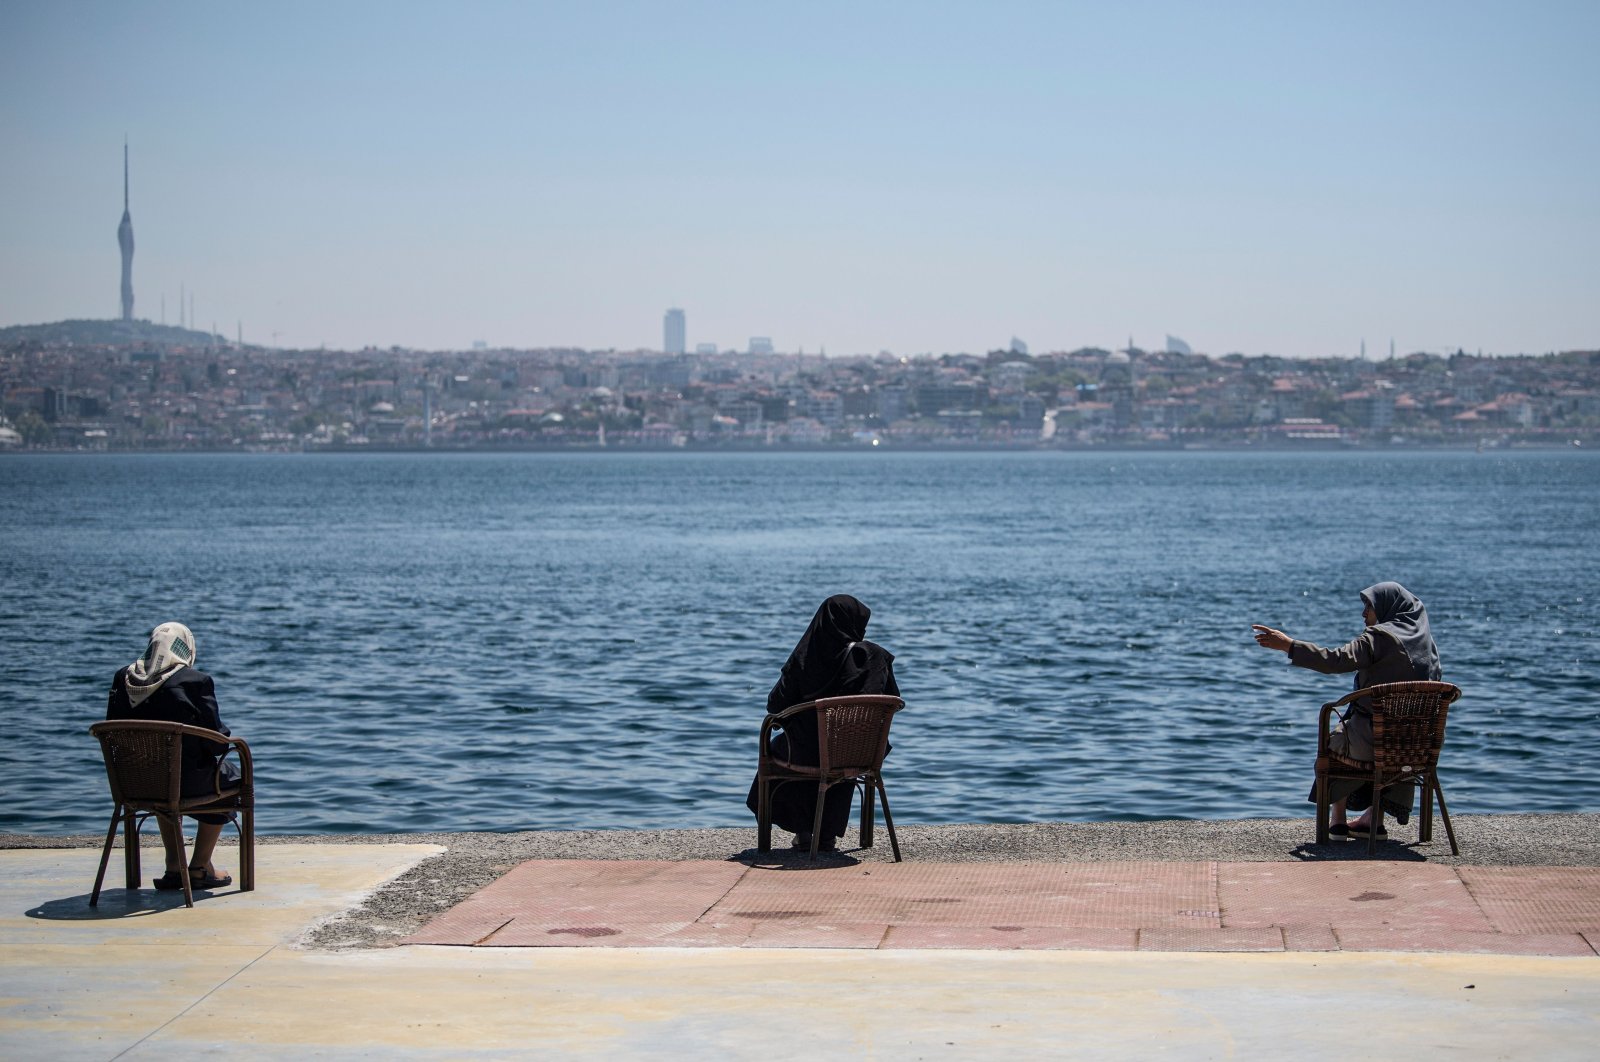 Women wearing protective face masks sit apart following social distancing measures at the seaside overlooking the Bosporus in Istanbul, Turkey, May 10, 2020. (AP Photo)